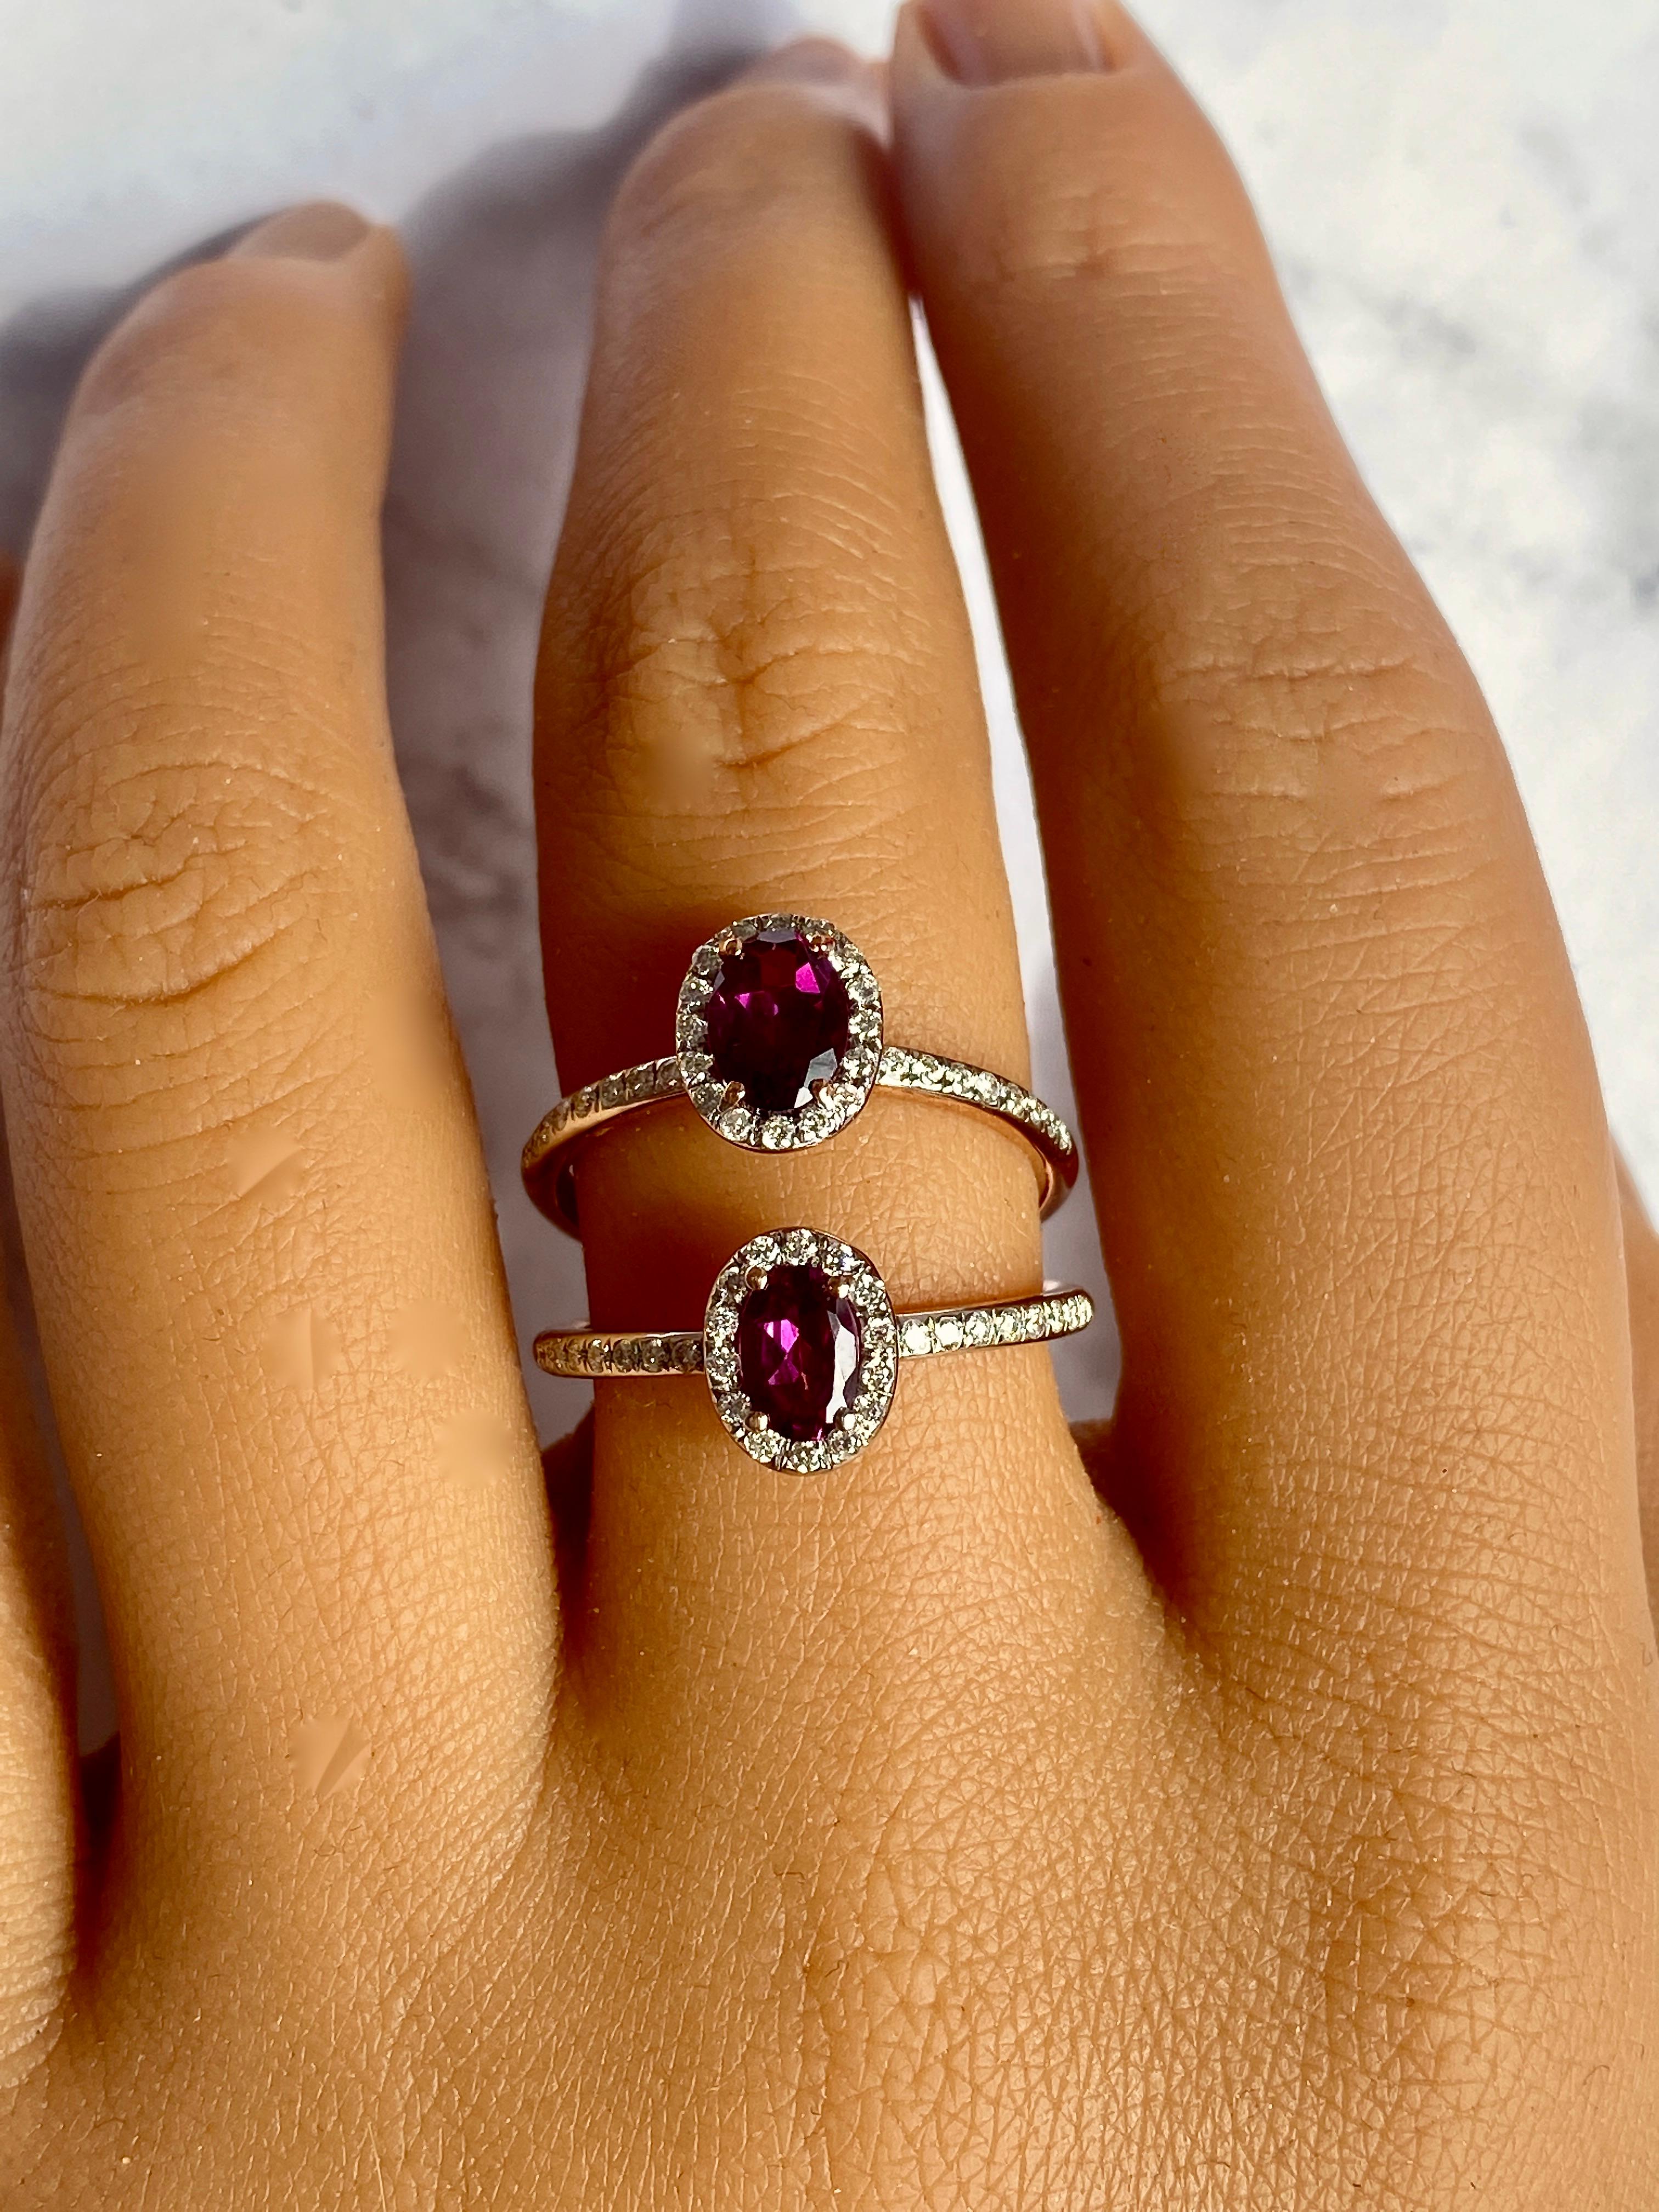 For Sale:  Gemstone Solitaire Ring Stack, 14k Solid Gold Rings with Natural Round Diamonds 7